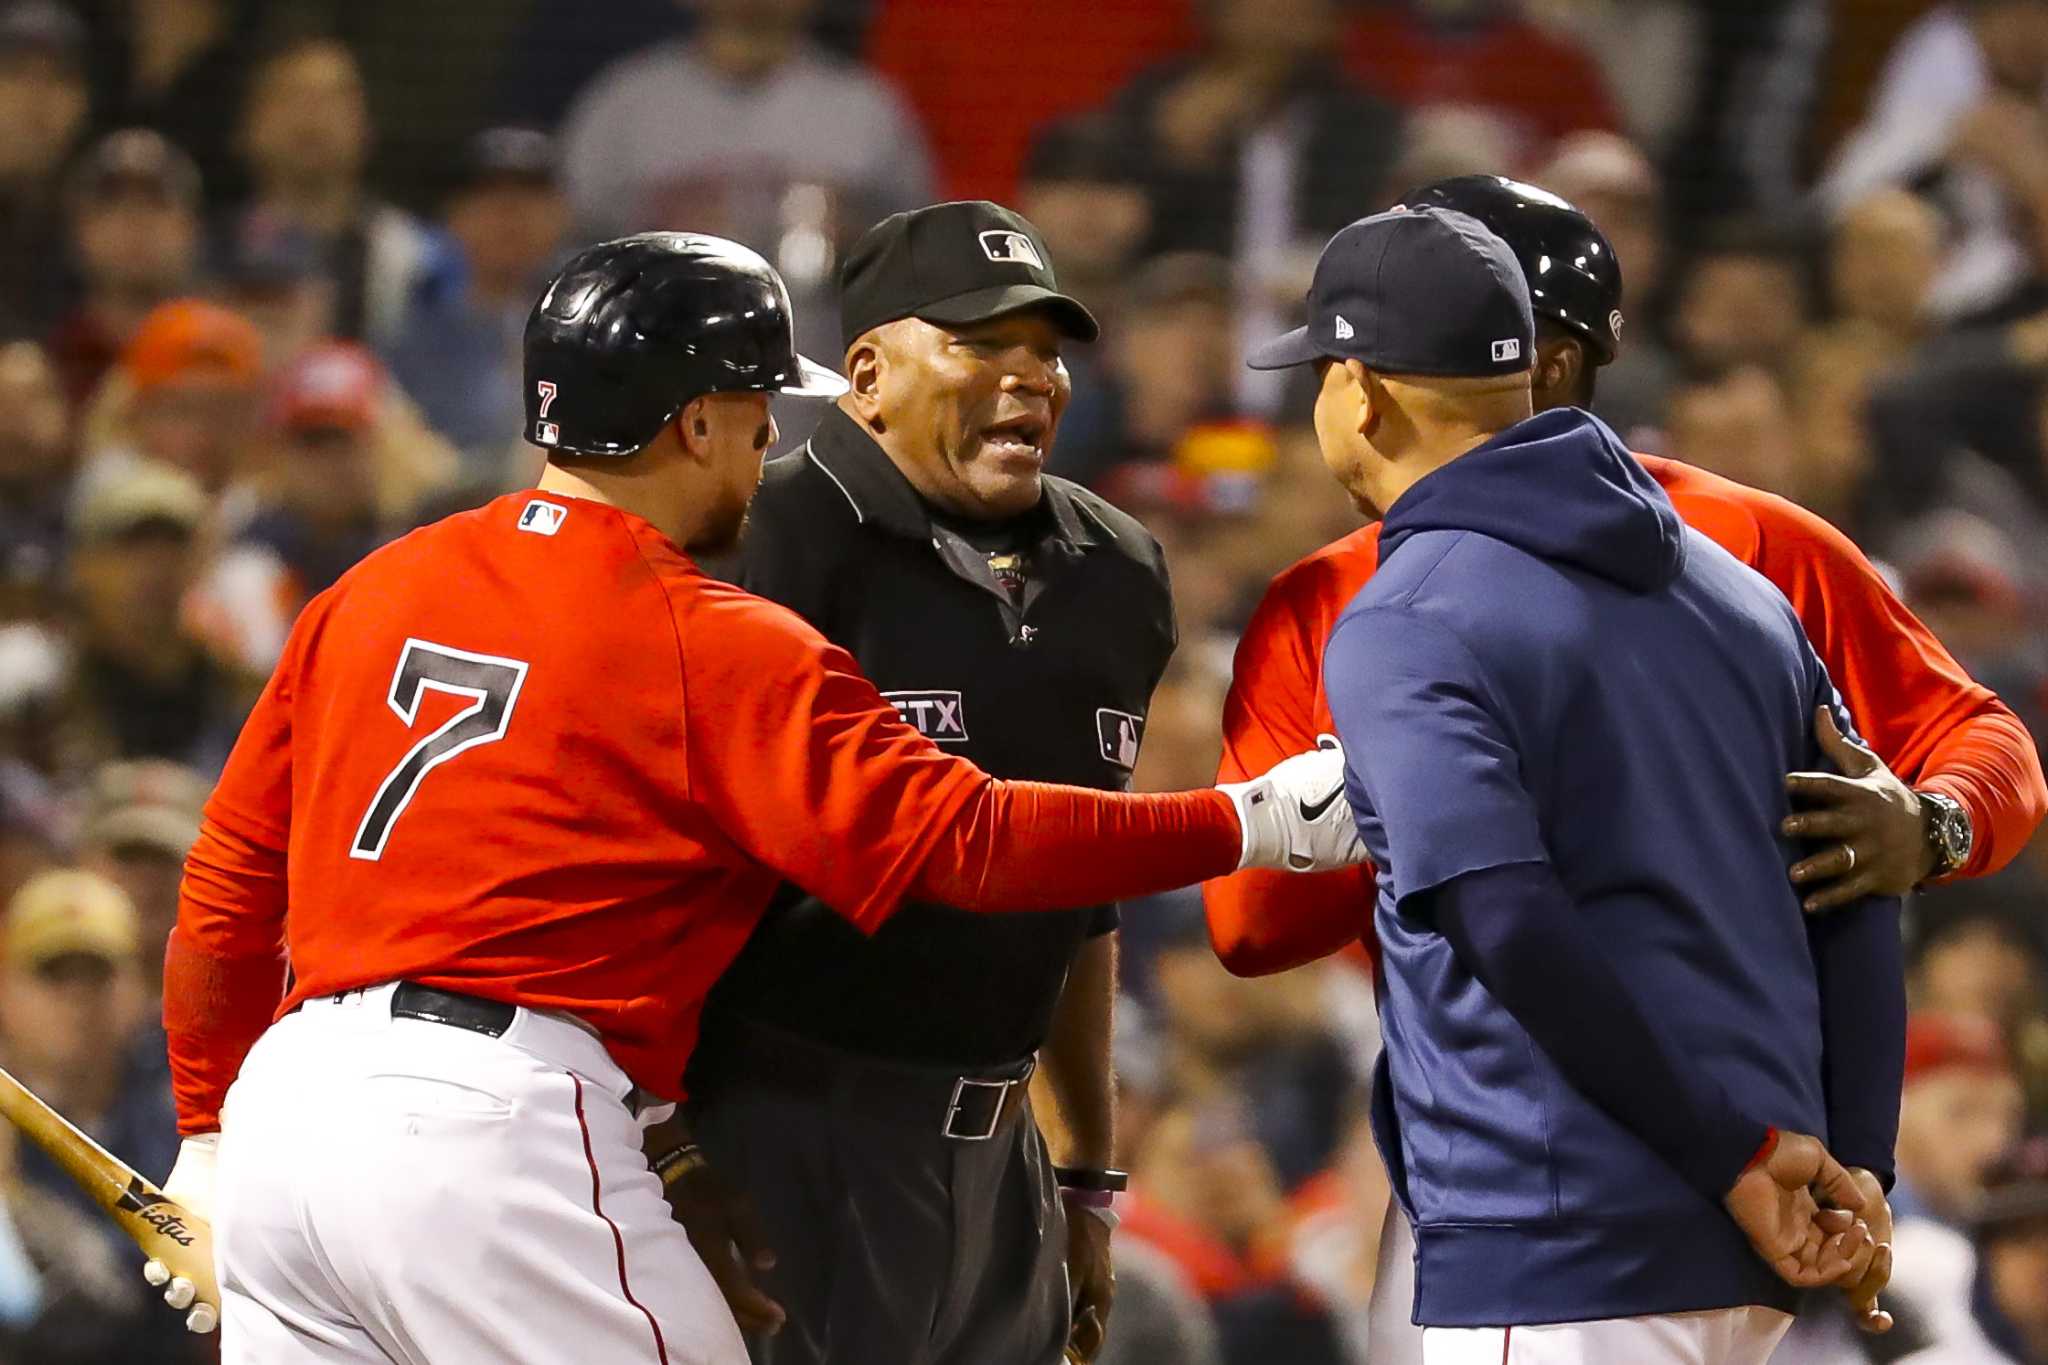 Boston Red Sox's Alex Cora on arguing with umpire Laz Diaz: 'I